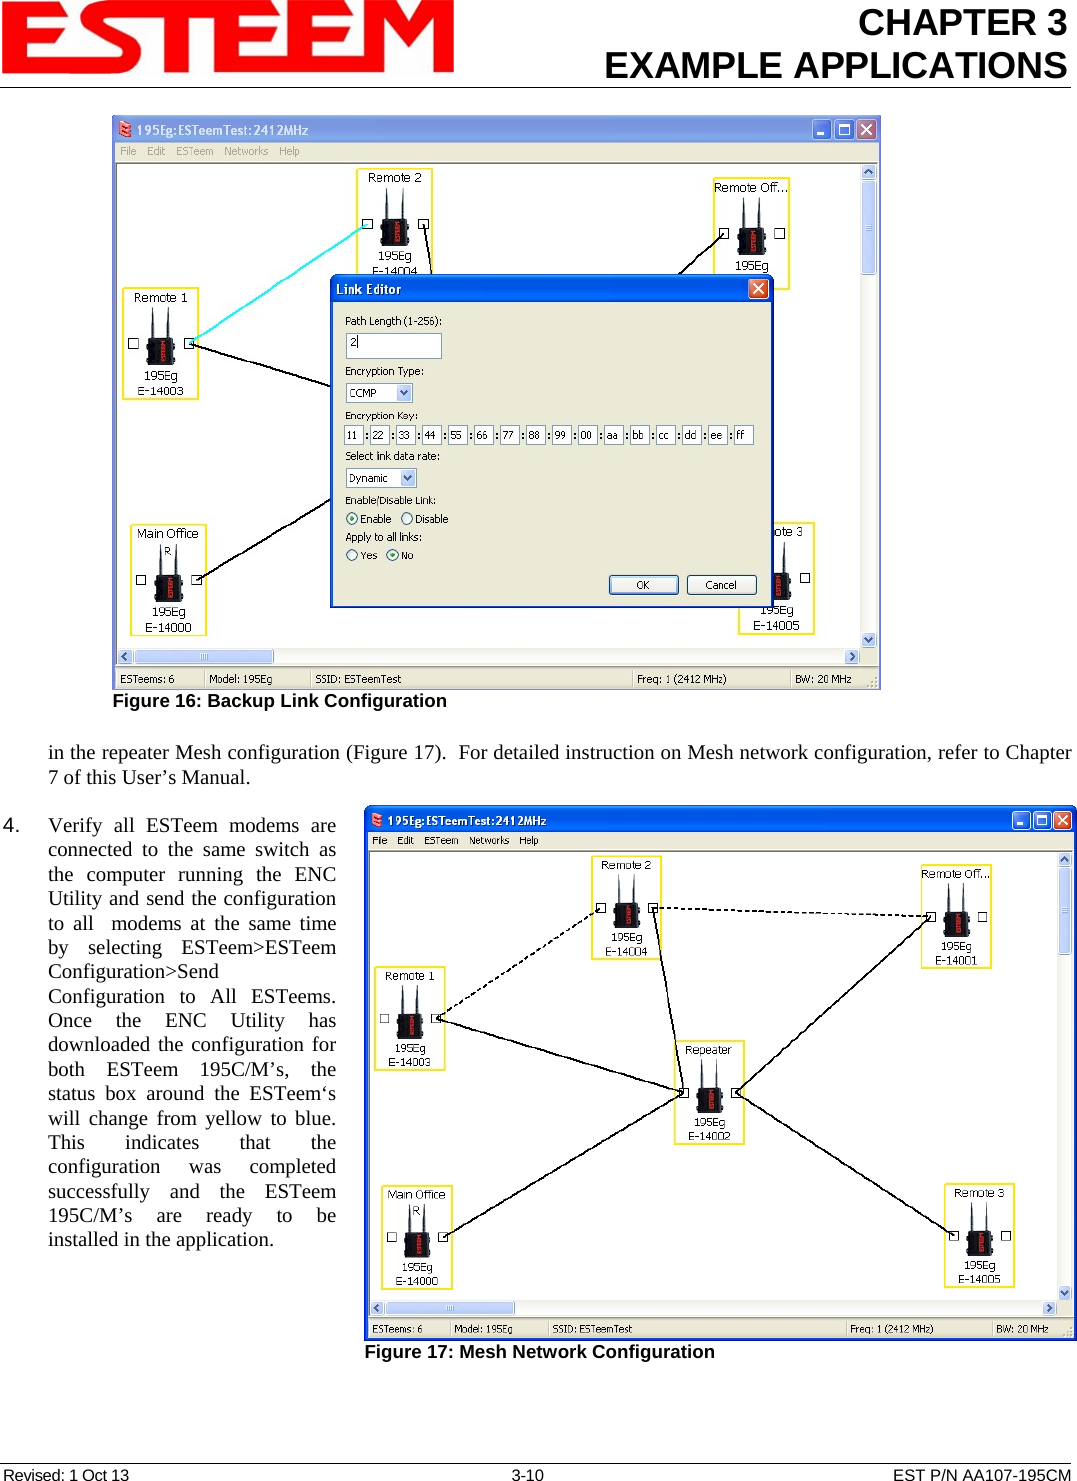 CHAPTER 3 EXAMPLE APPLICATIONS  in the repeater Mesh configuration (Figure 17).  For detailed instruction on Mesh network configuration, refer to Chapter 7 of this User’s Manual.  Figure 16: Backup Link Configuration   4.    Verify all ESTeem modems are connected to the same switch as the computer running the ENC Utility and send the configuration to all  modems at the same time by selecting ESTeem&gt;ESTeem Configuration&gt;Send Configuration to All ESTeems. Once the ENC Utility has downloaded the configuration for both ESTeem 195C/M’s, the status box around the ESTeem‘s will change from yellow to blue.  This indicates that the configuration was completed successfully and the ESTeem 195C/M’s are ready to be installed in the application.  Figure 17: Mesh Network Configuration  Revised: 1 Oct 13  3-10  EST P/N AA107-195CM 